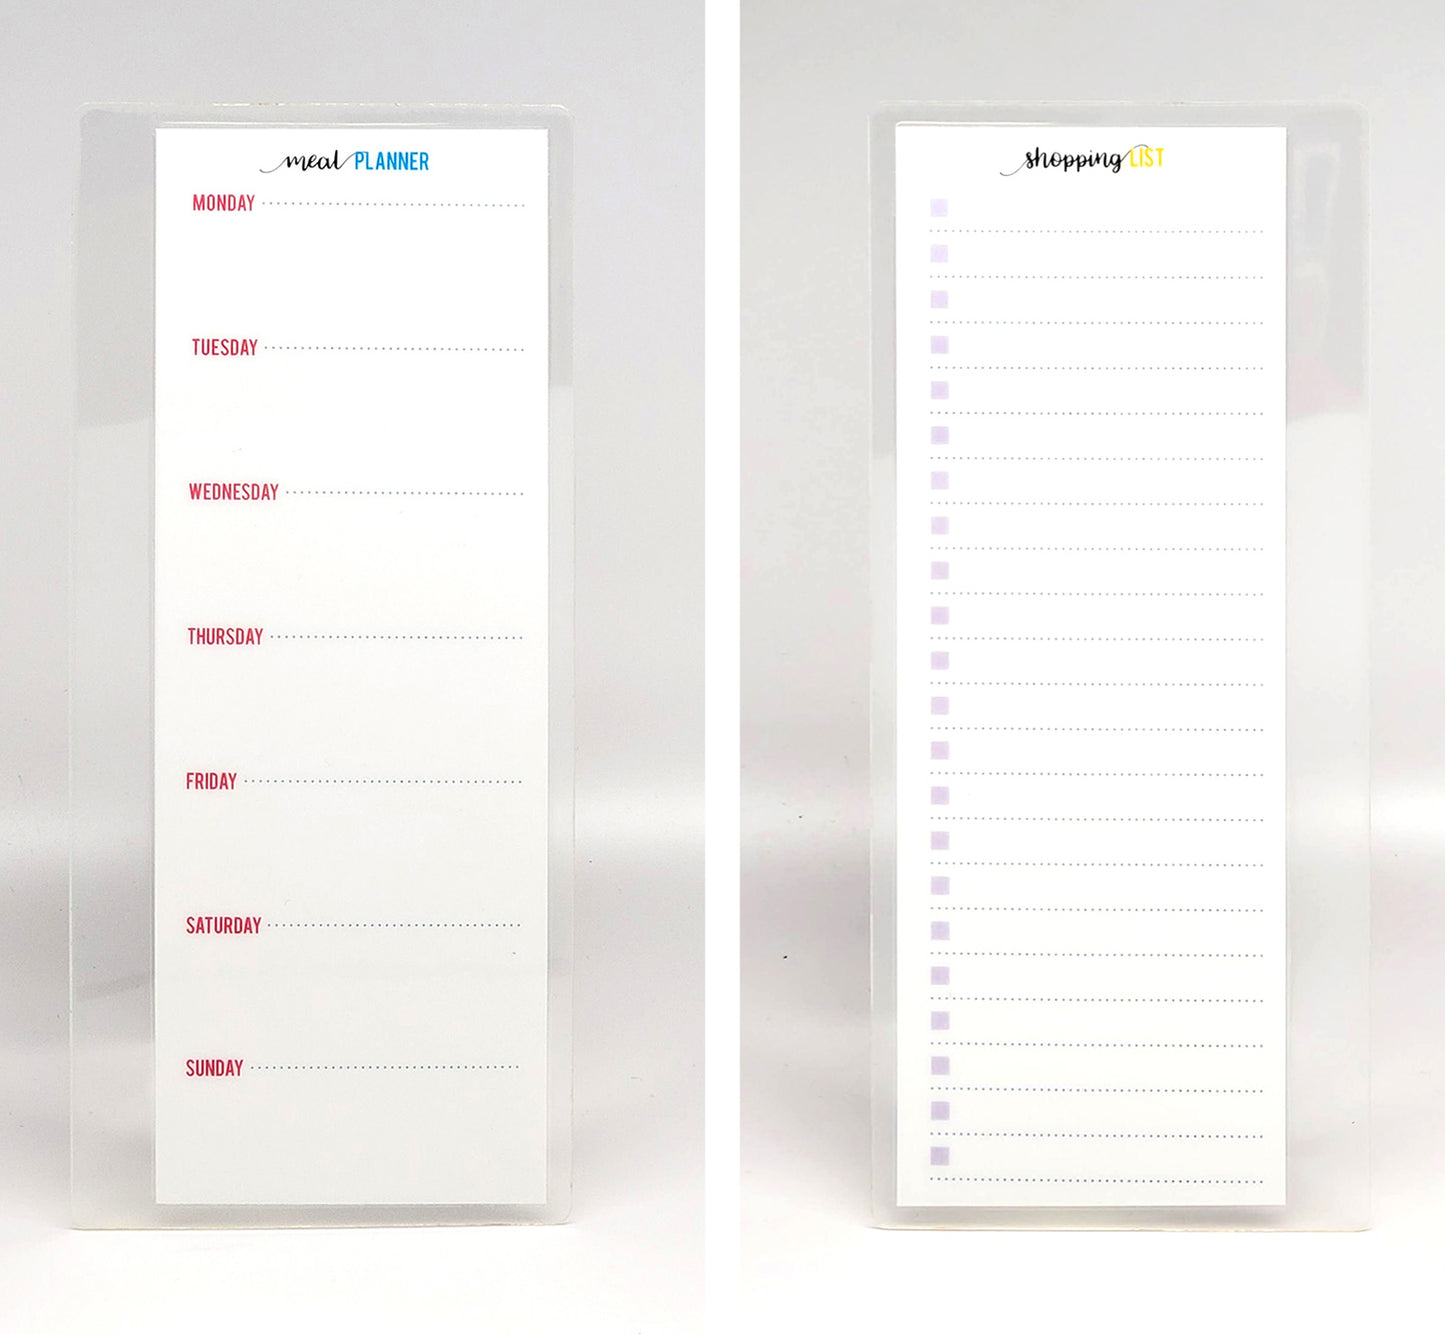 Shopping List & Meal Planner Laminated Bookmark